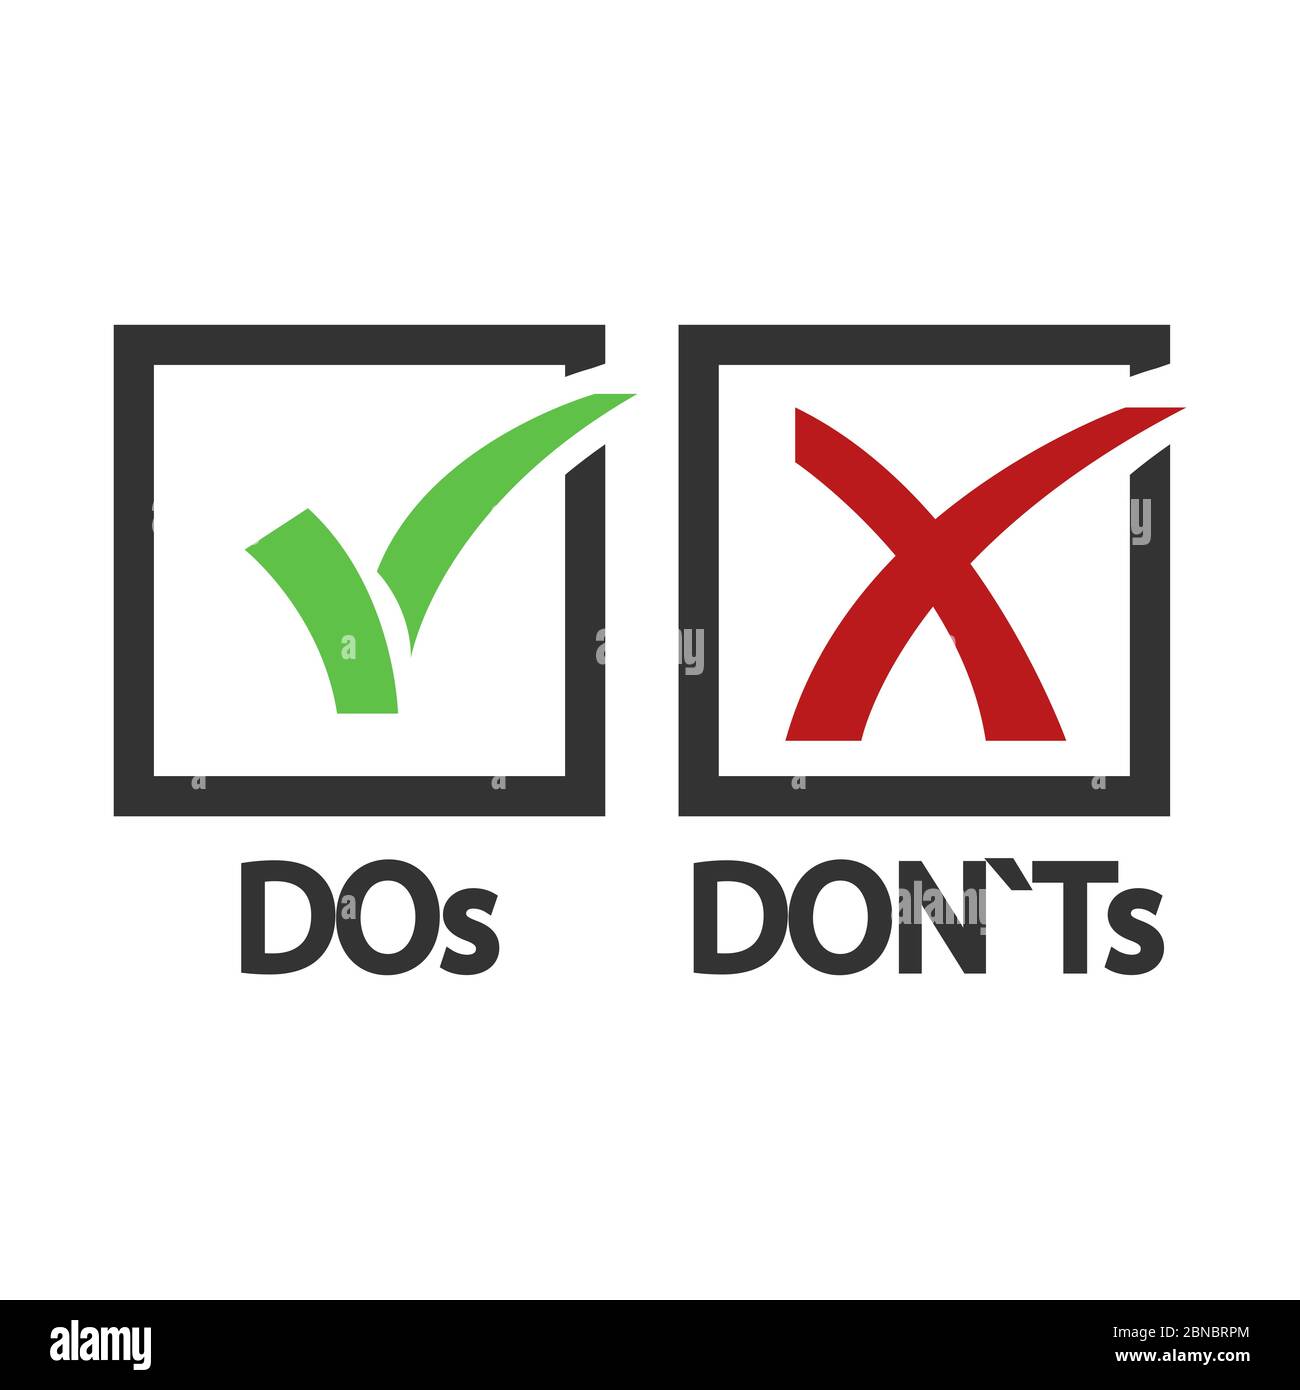 DOs and DONTs yes and no vector sign. Illustration of correct and wrong, cross and tick sign Stock Vector